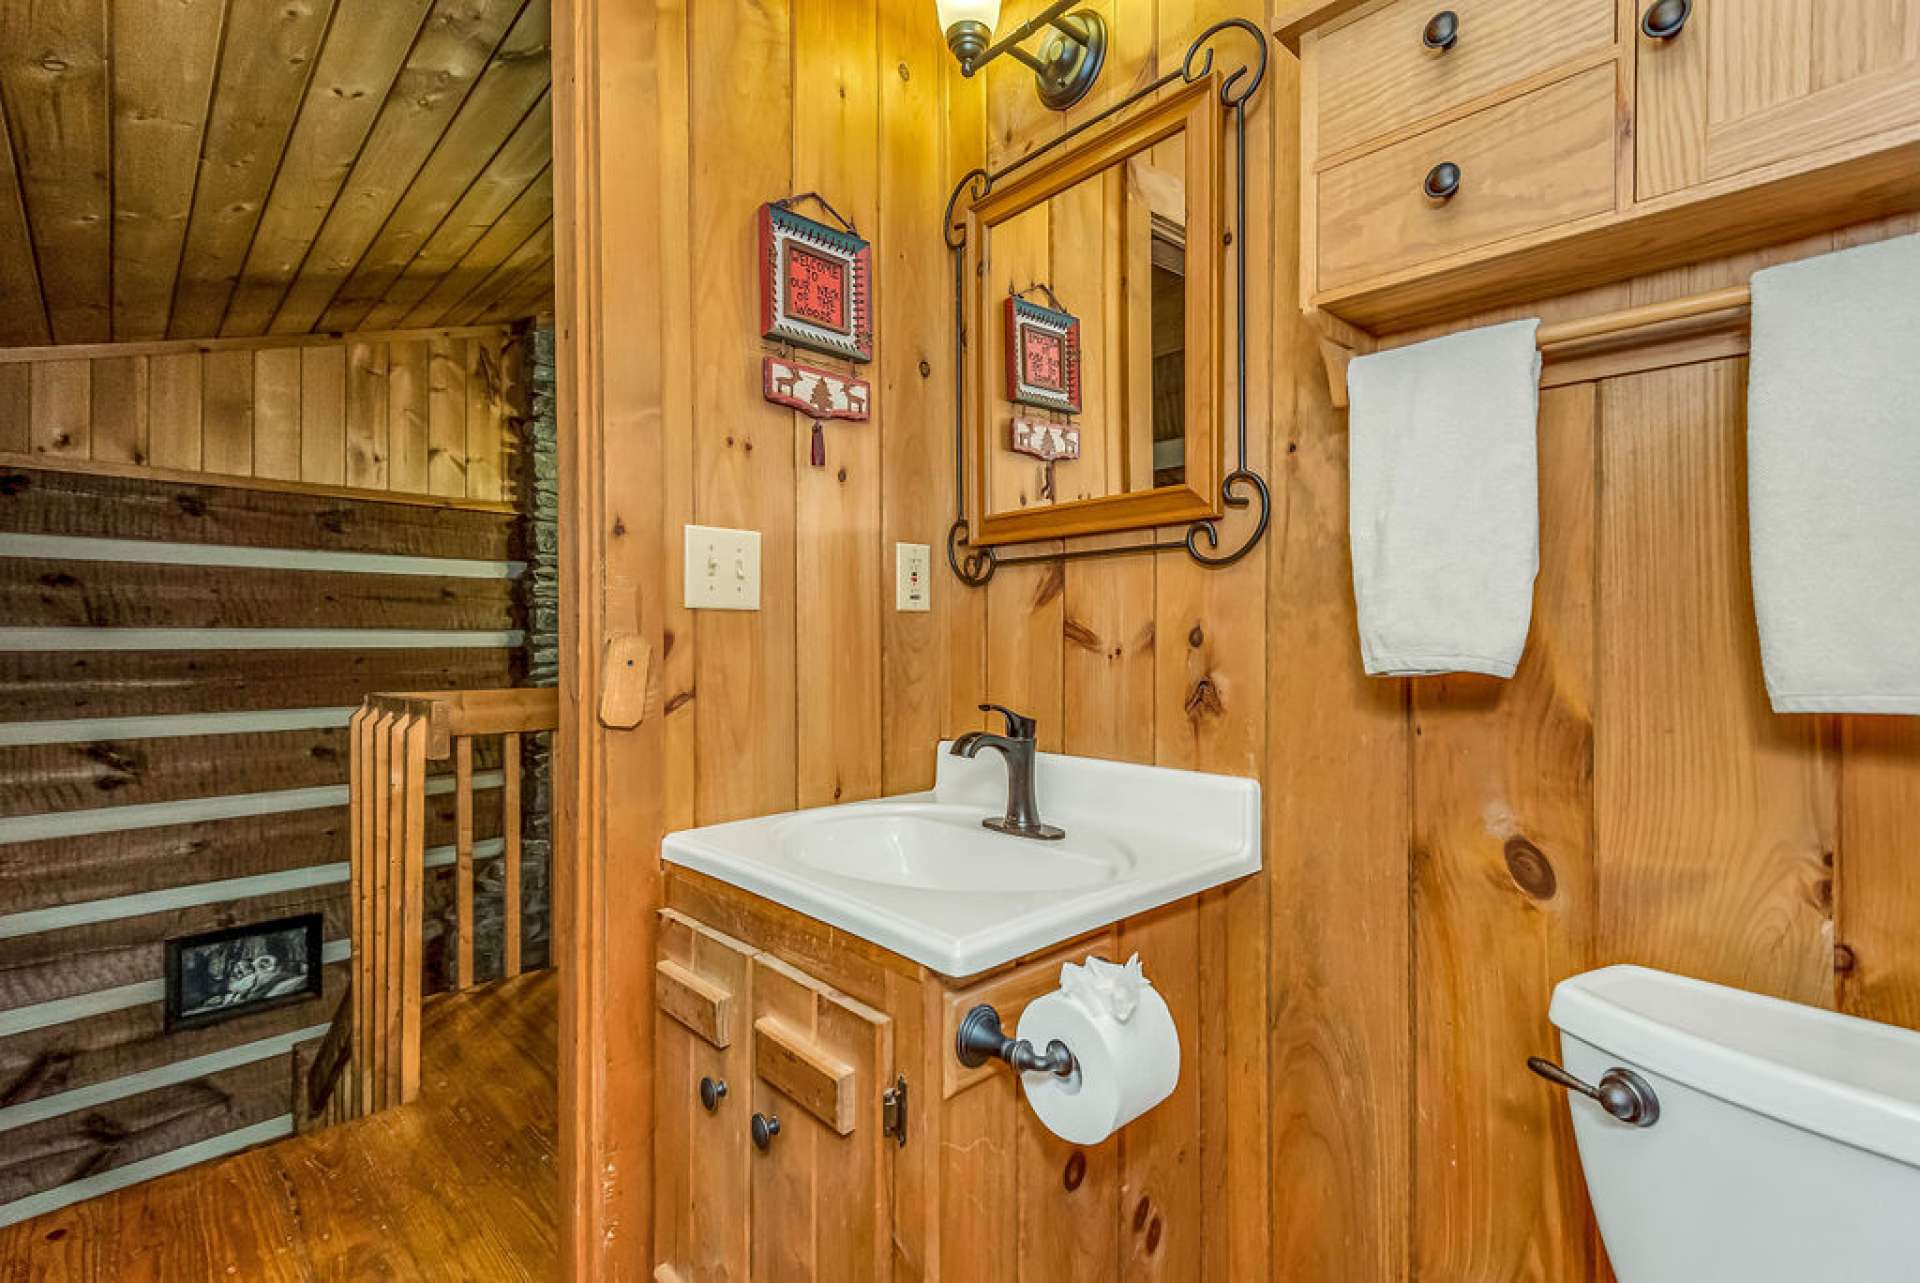 Your guests will appreciate the convenience of the nearby bathroom.